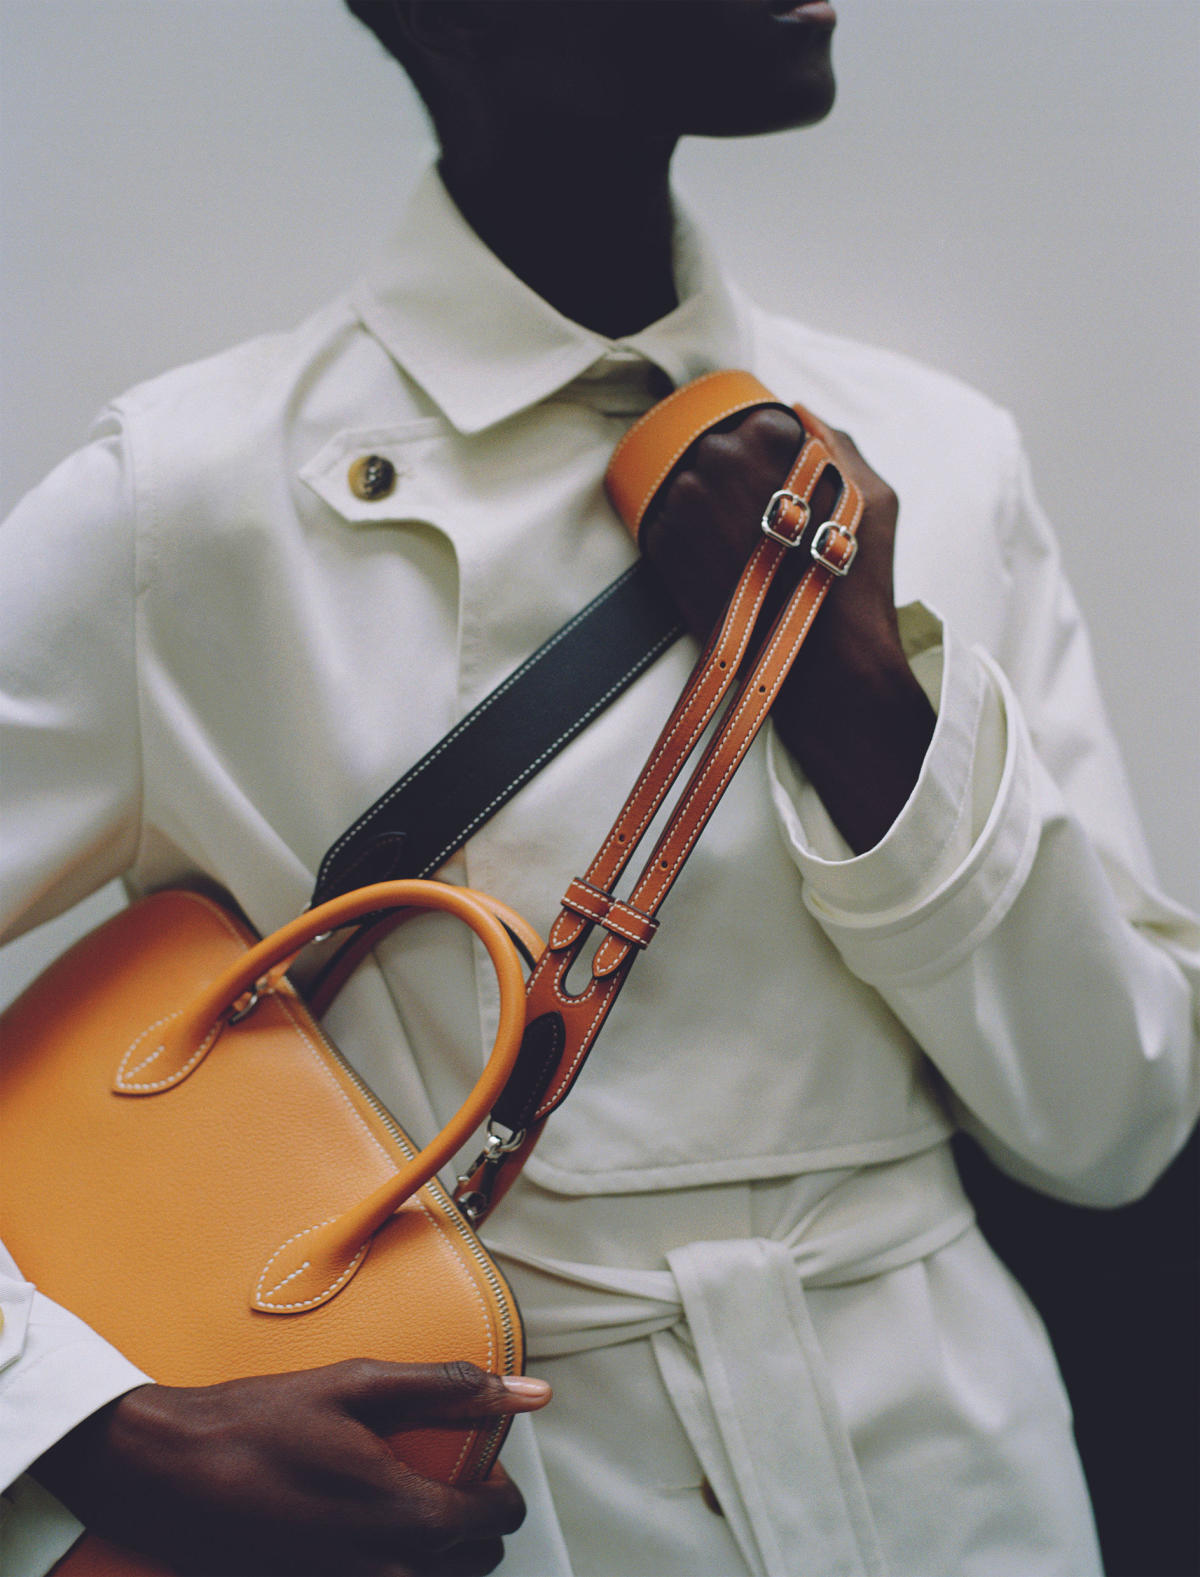 Complete the holy trinity of Hermès with the Bolide bag as it celebrates  100 years